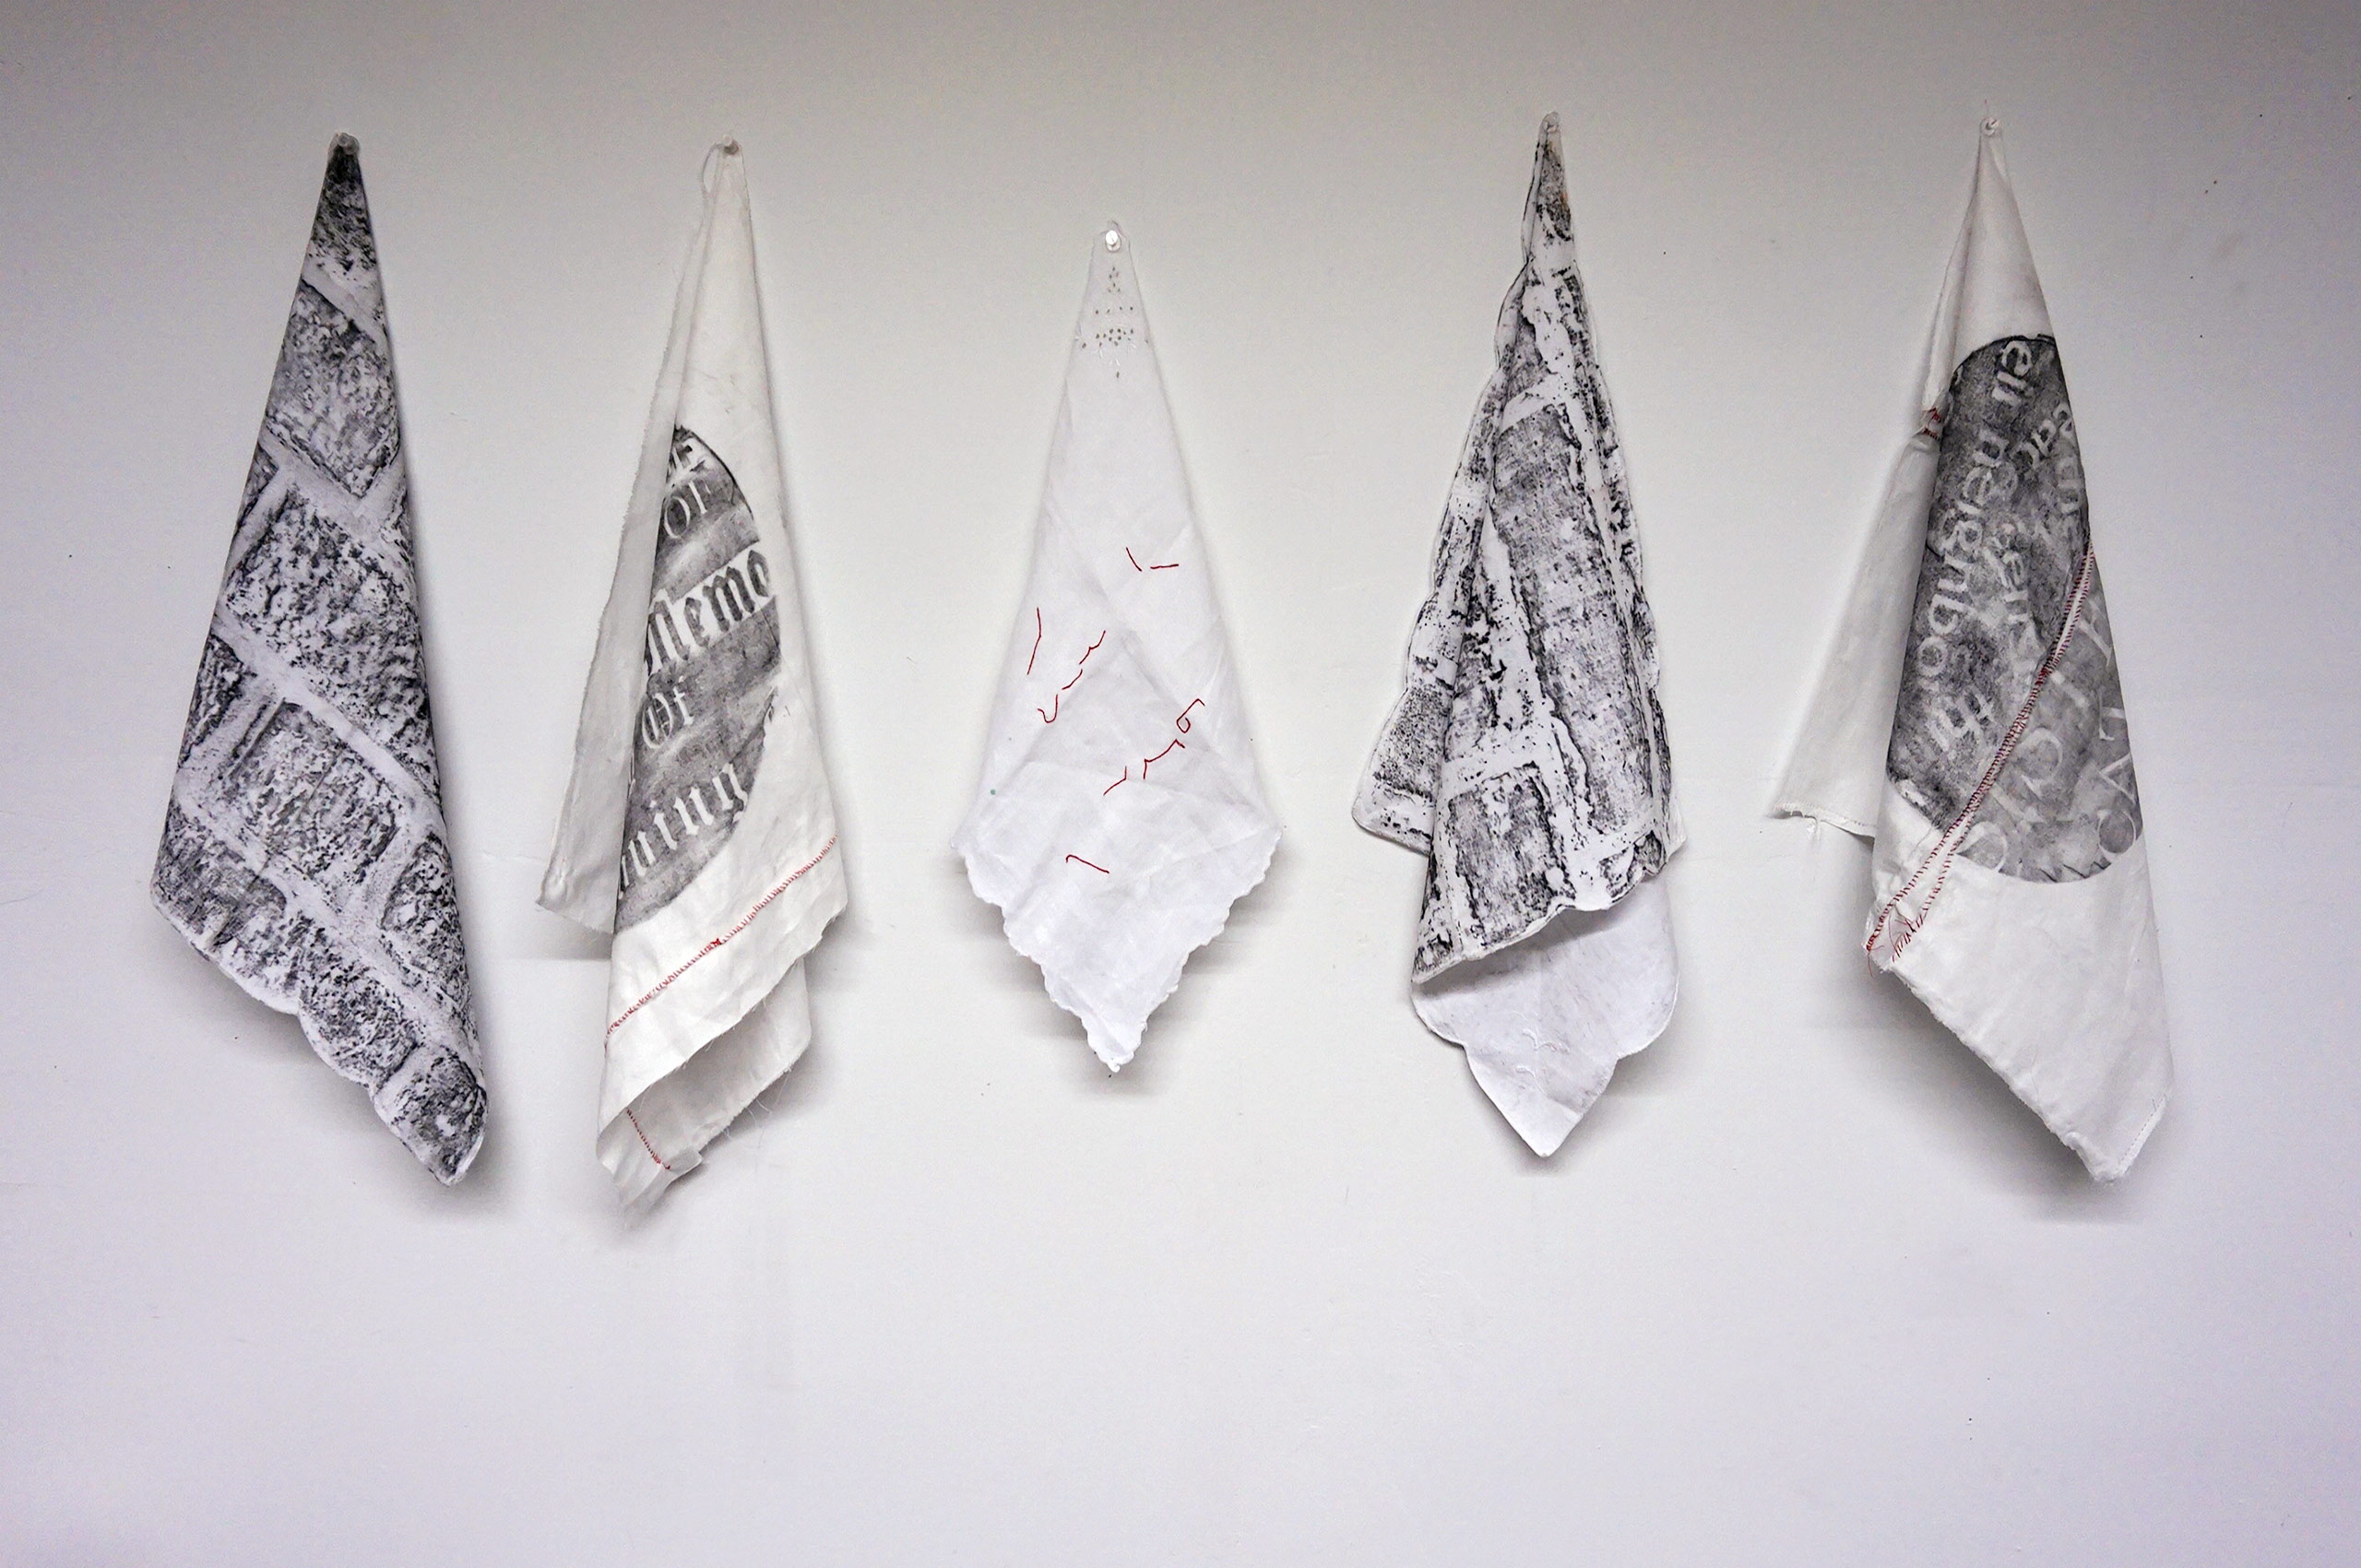 Sketches and rubbings on white linen